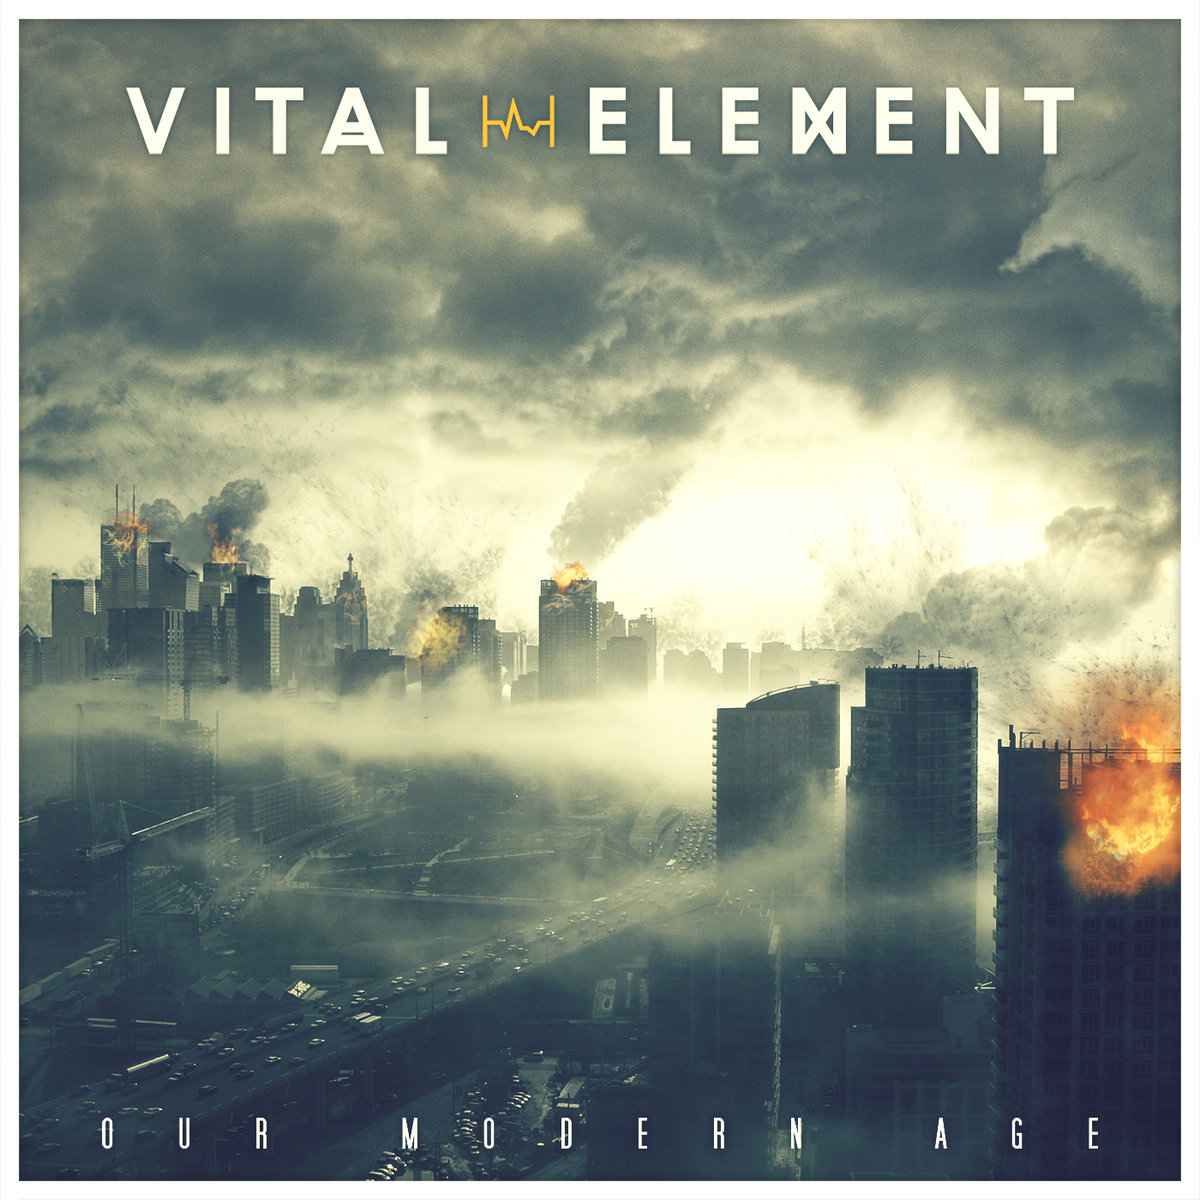 Vital Element – Our Modern Age